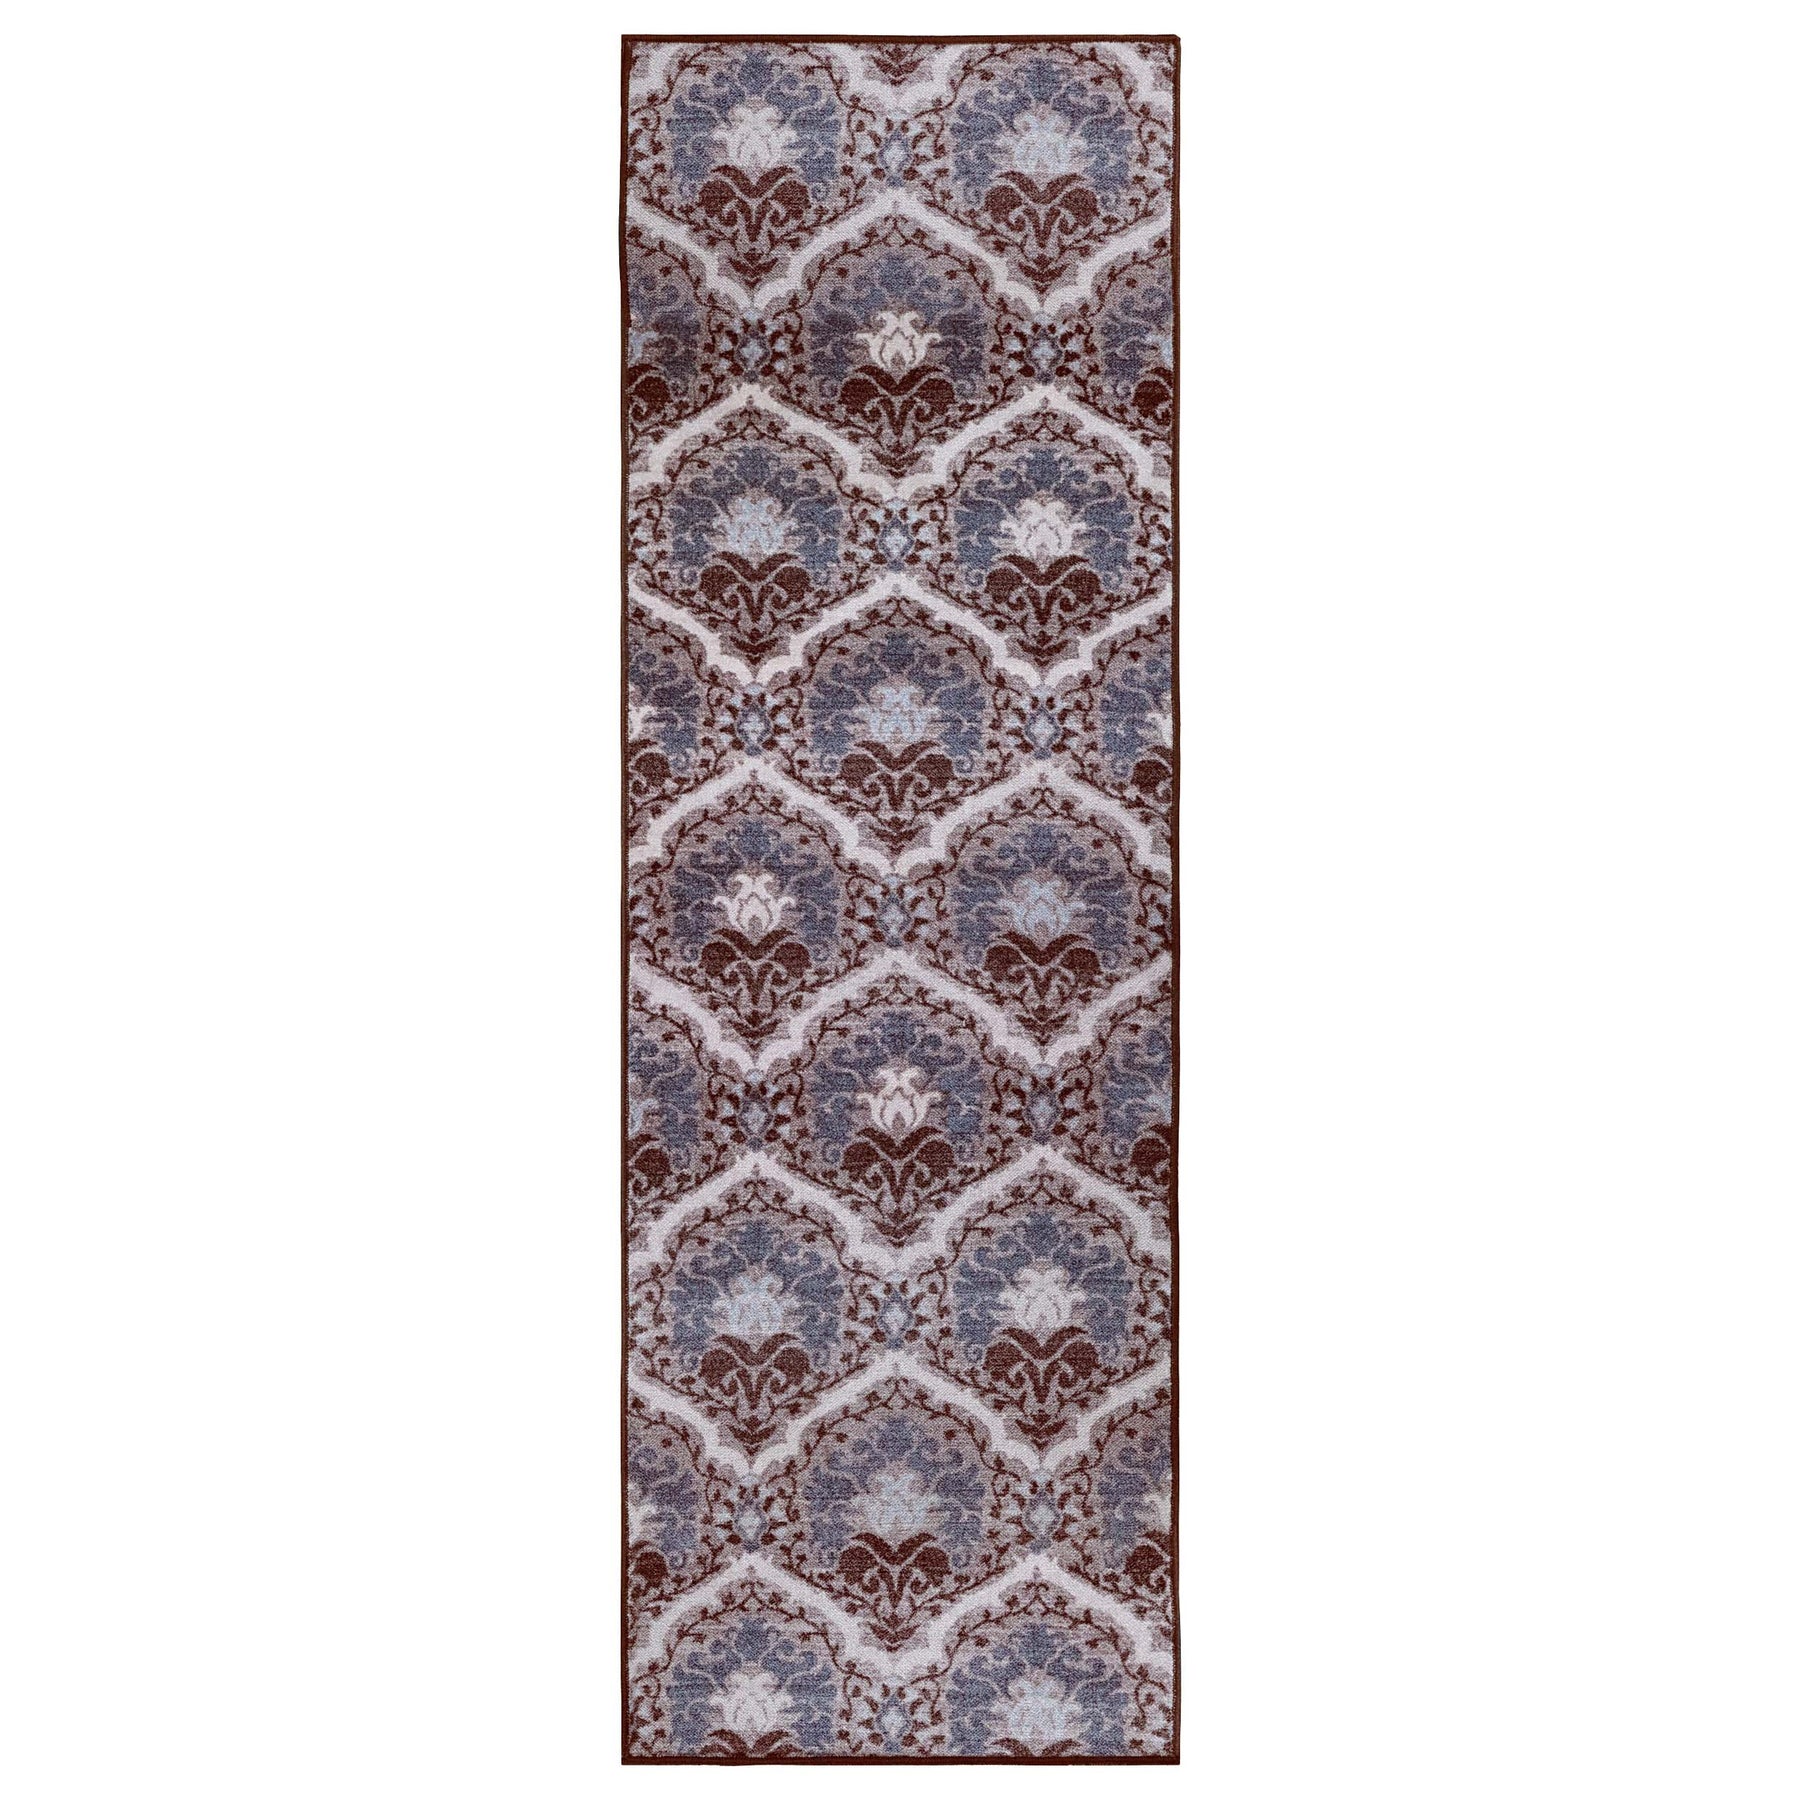 Chloe Non-Slip Floral Damask Indoor Washable Area Rug - Chocolate